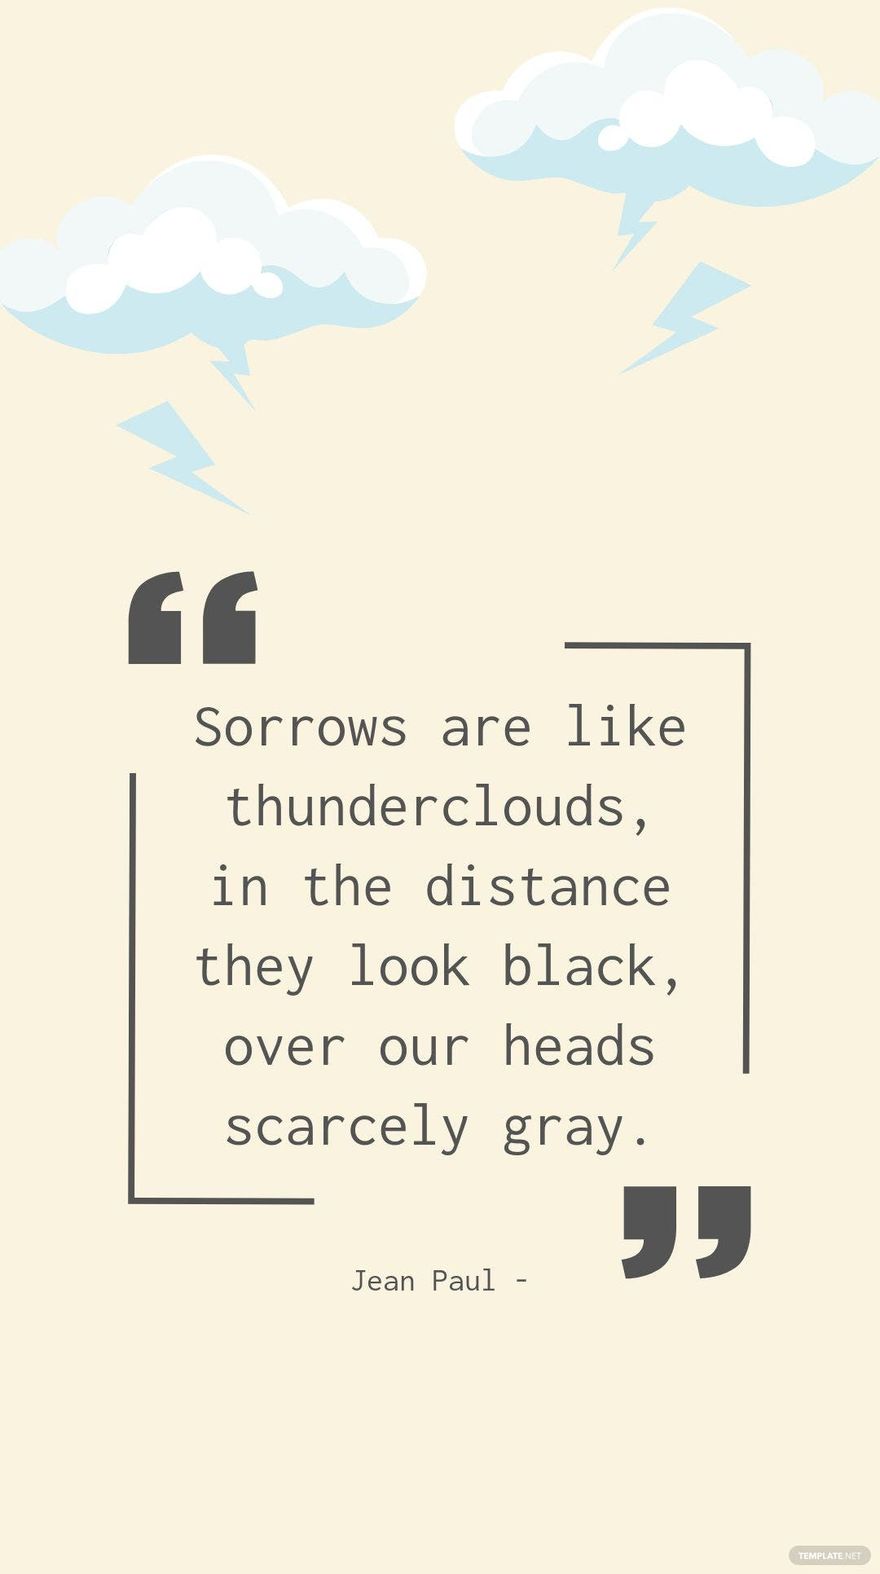 Jean Paul - Sorrows are like thunderclouds, in the distance they look black, over our heads scarcely gray.